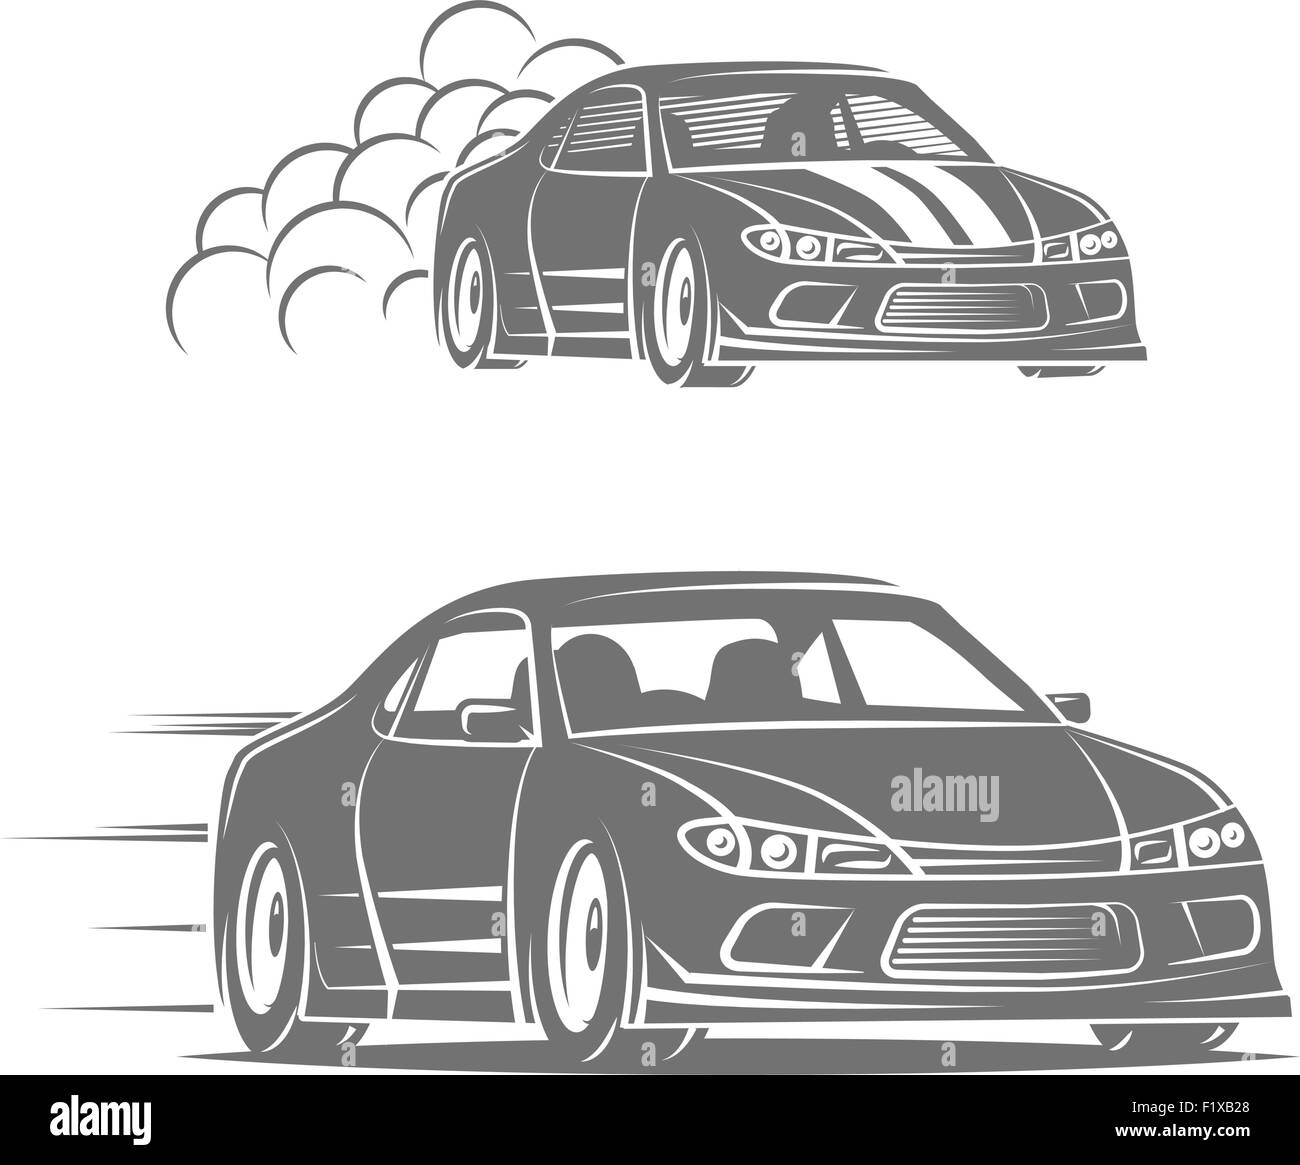 Drift car Black and White Stock Photos & Images - Alamy